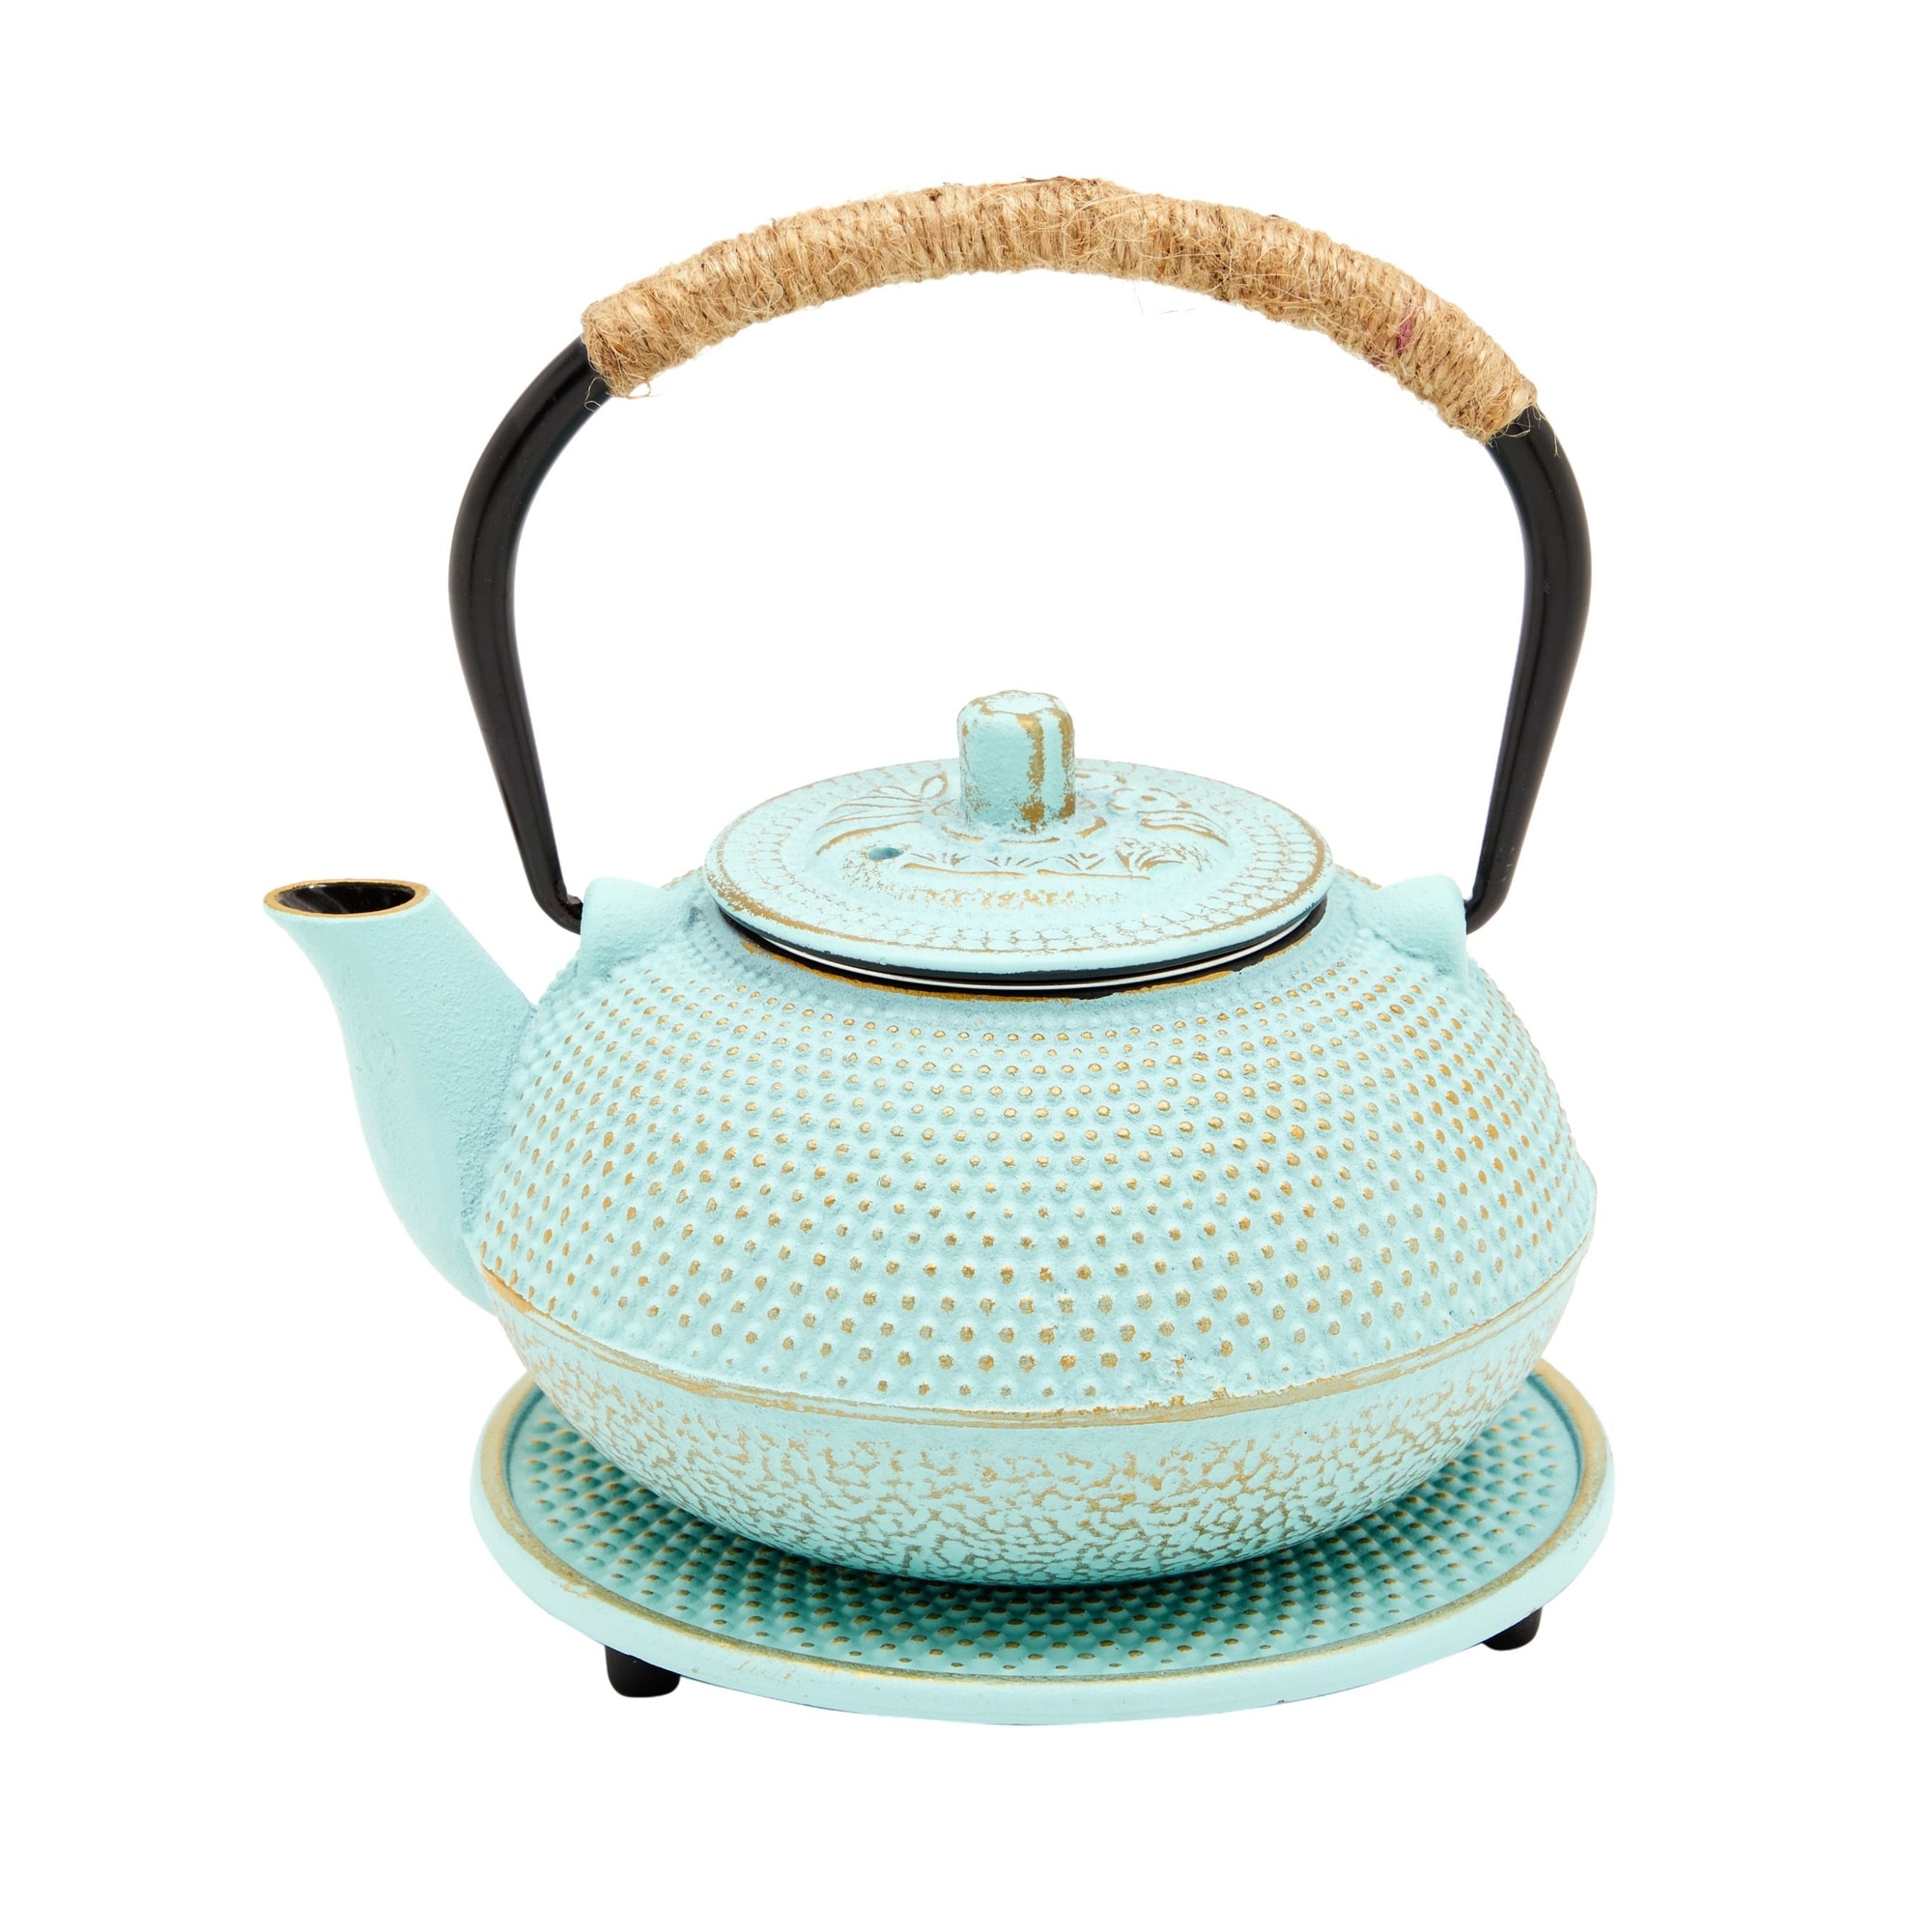 https://ak1.ostkcdn.com/images/products/is/images/direct/cdad8b709db7359fbf4f45bb12d09c41b22166dd/3-Piece-Set-Green-Japanese-Cast-Iron-Teapot%2C-Loose-Leaf-Tetsubin-with-Infuser-and-Trivet-%2818.5-oz%29.jpg